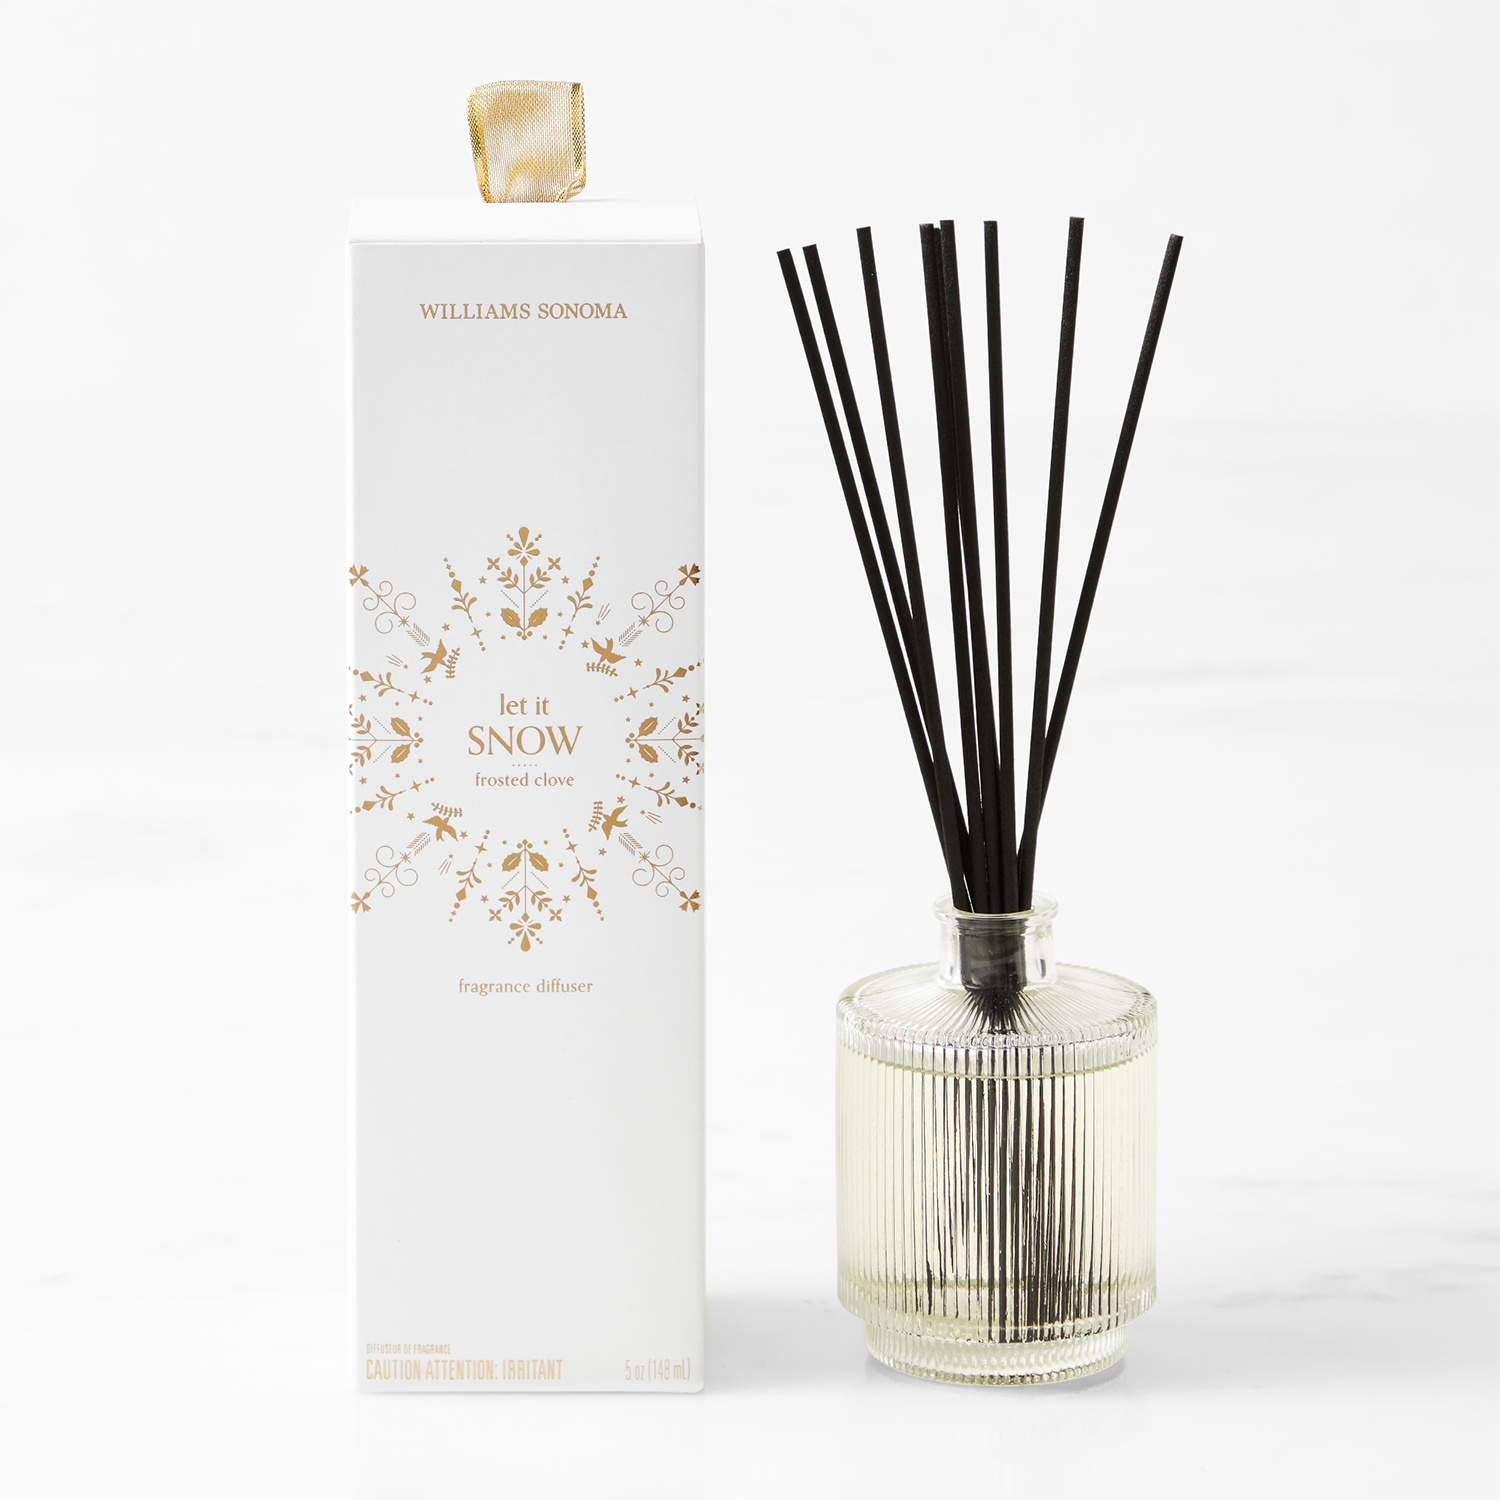 Faceted Reed Diffuser by Williams-Sonoma Next to White Box Package with Snow Decal